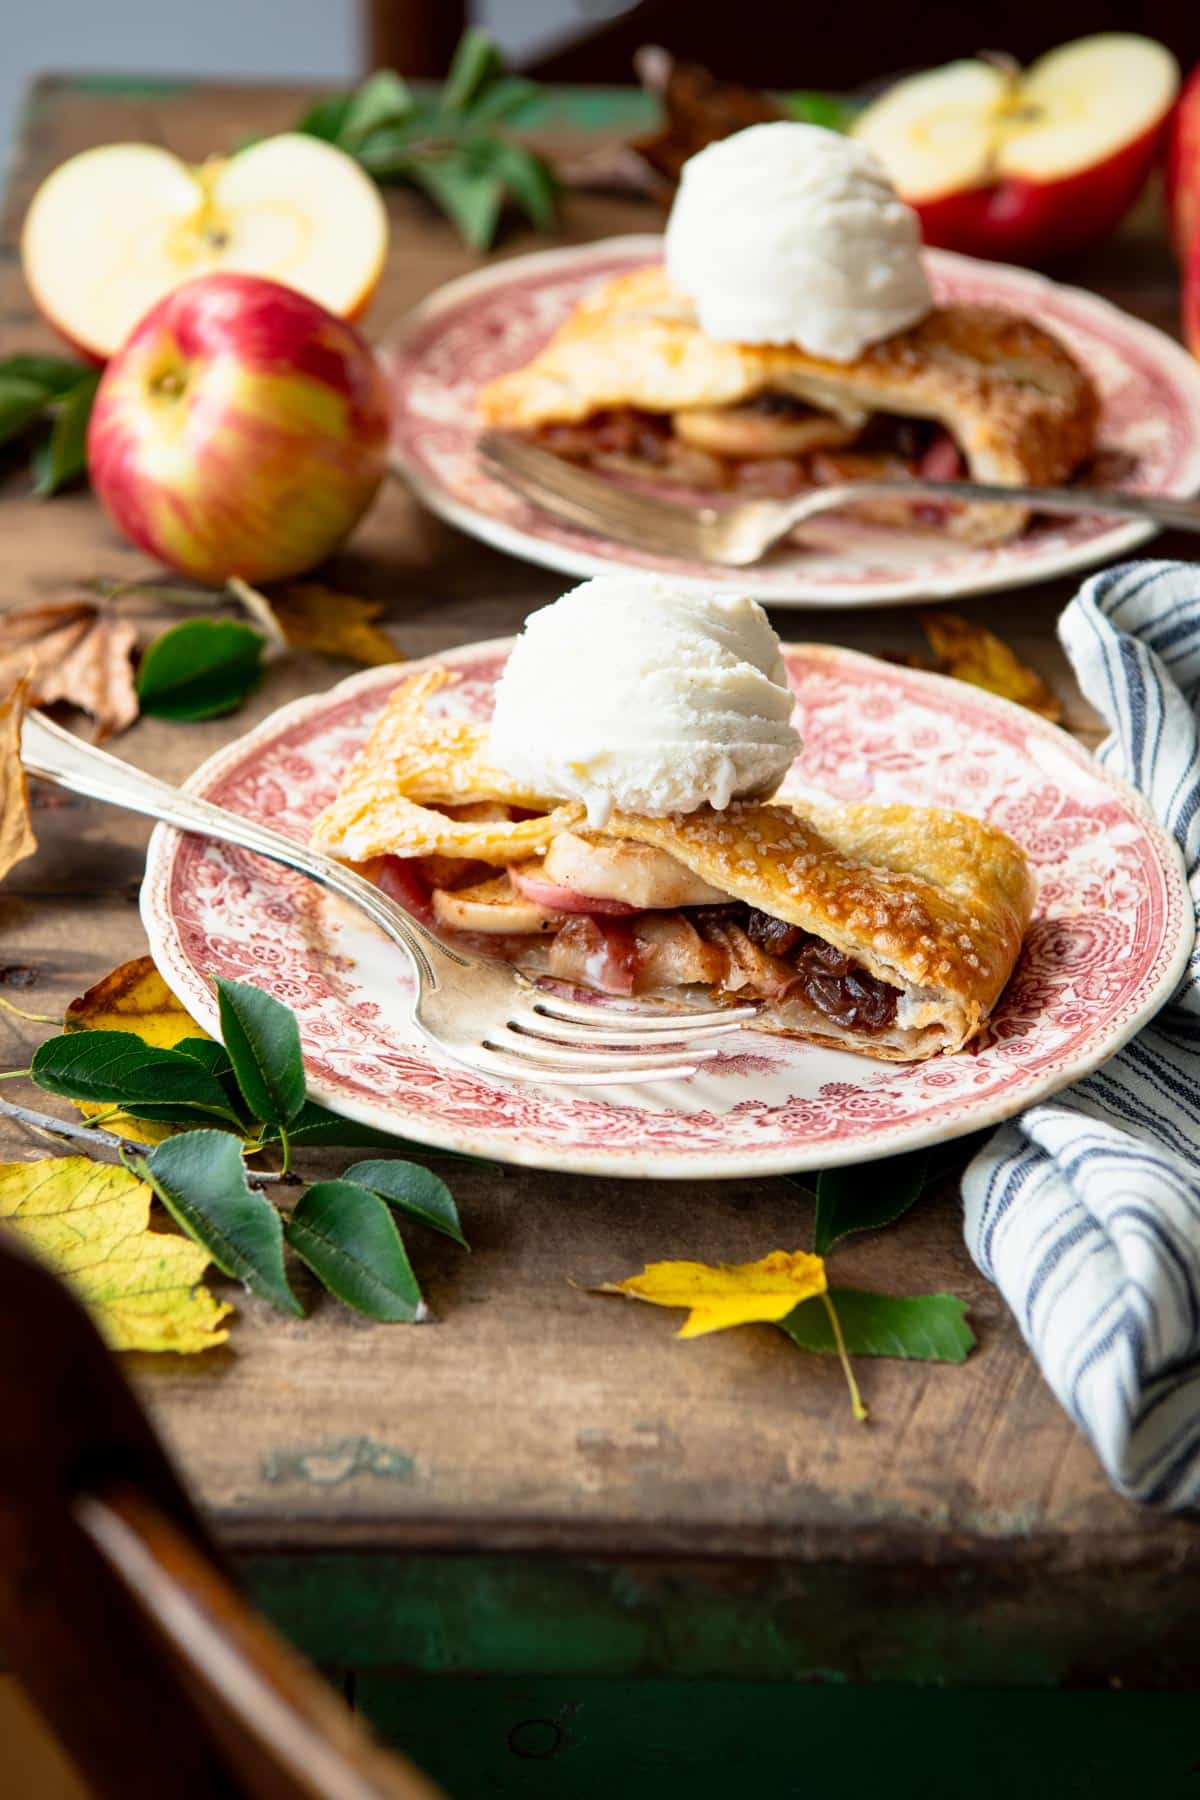 Two pieces of easy apple strudel recipe on a wooden table with vanilla ice cream.